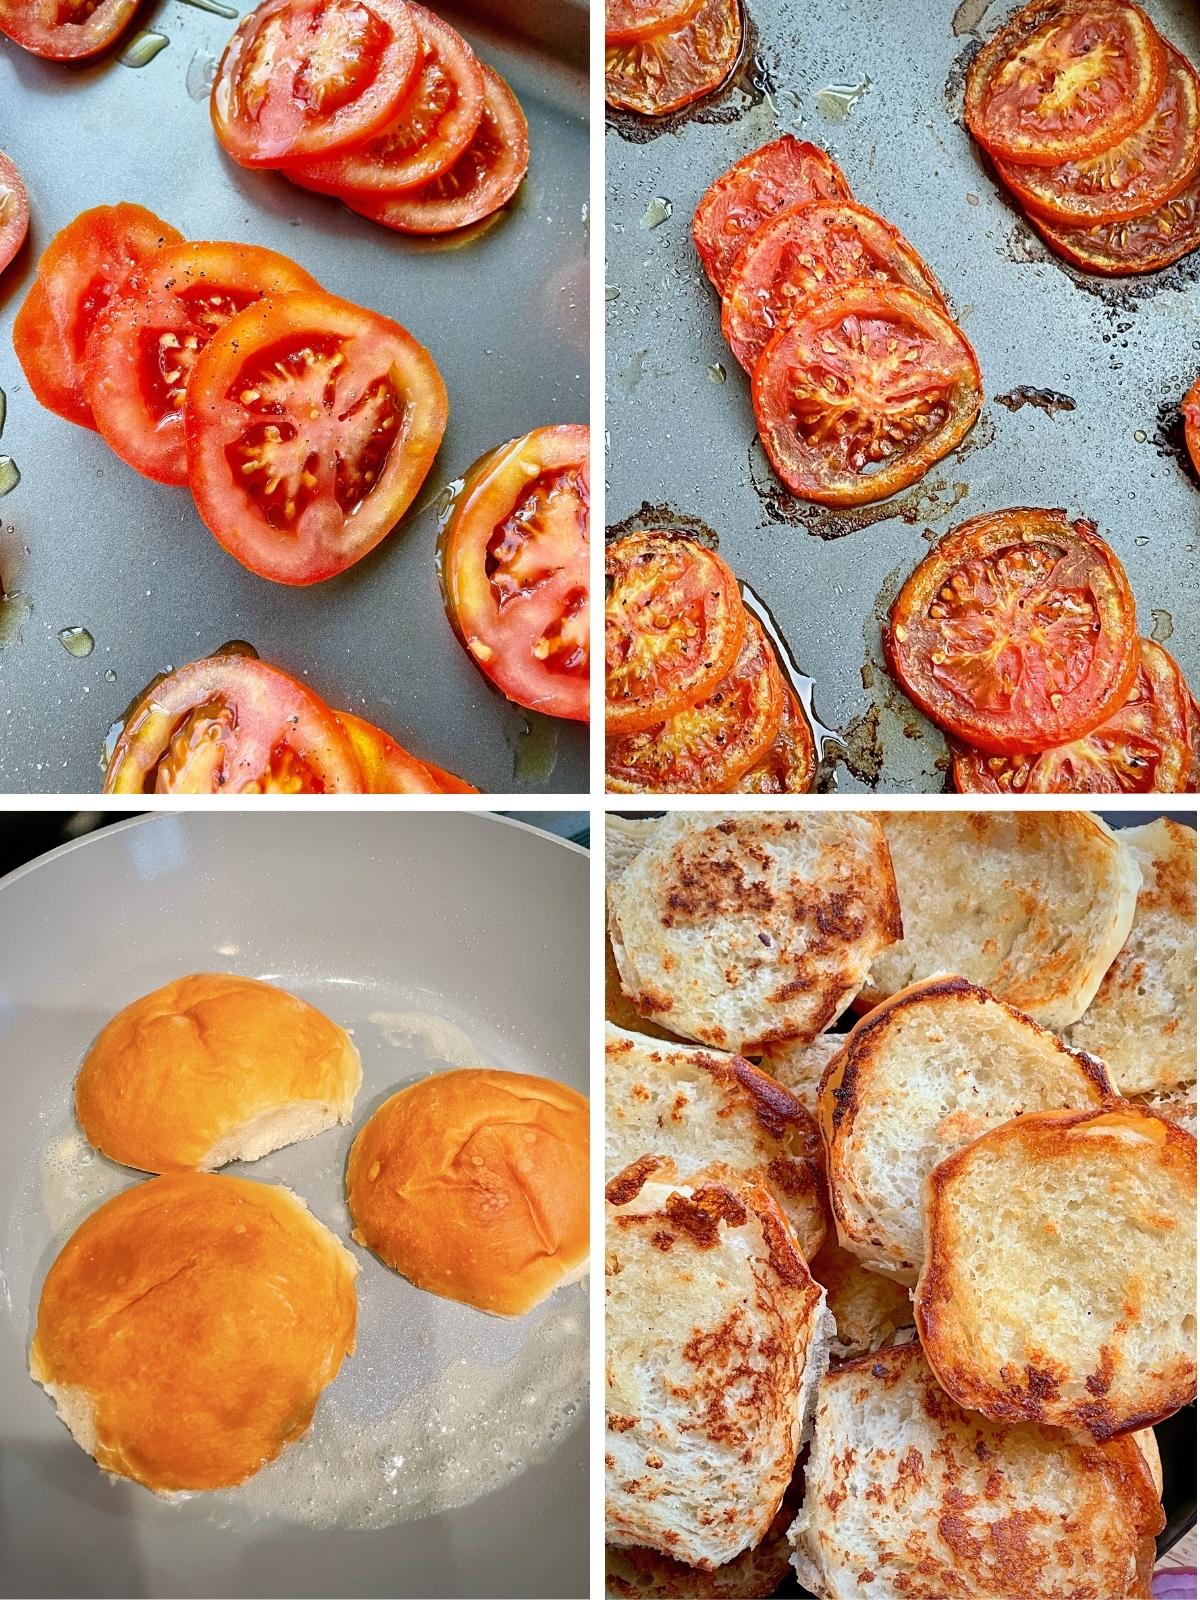 Roasted tomatoes and toasted bread.